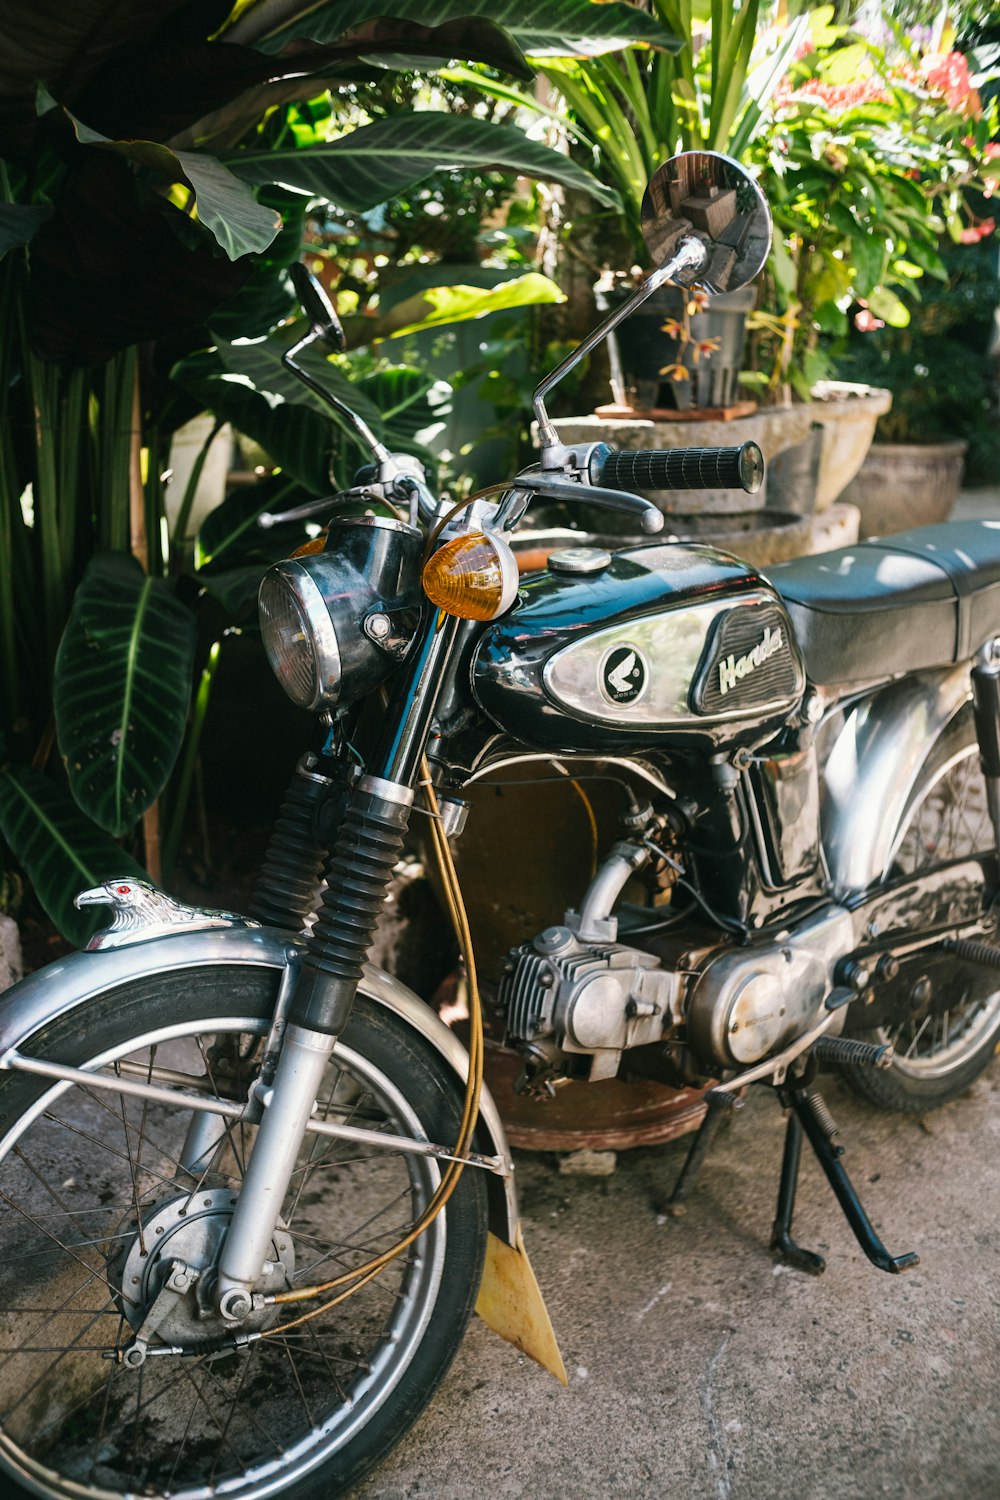 a motorcycle parked in front of some plants